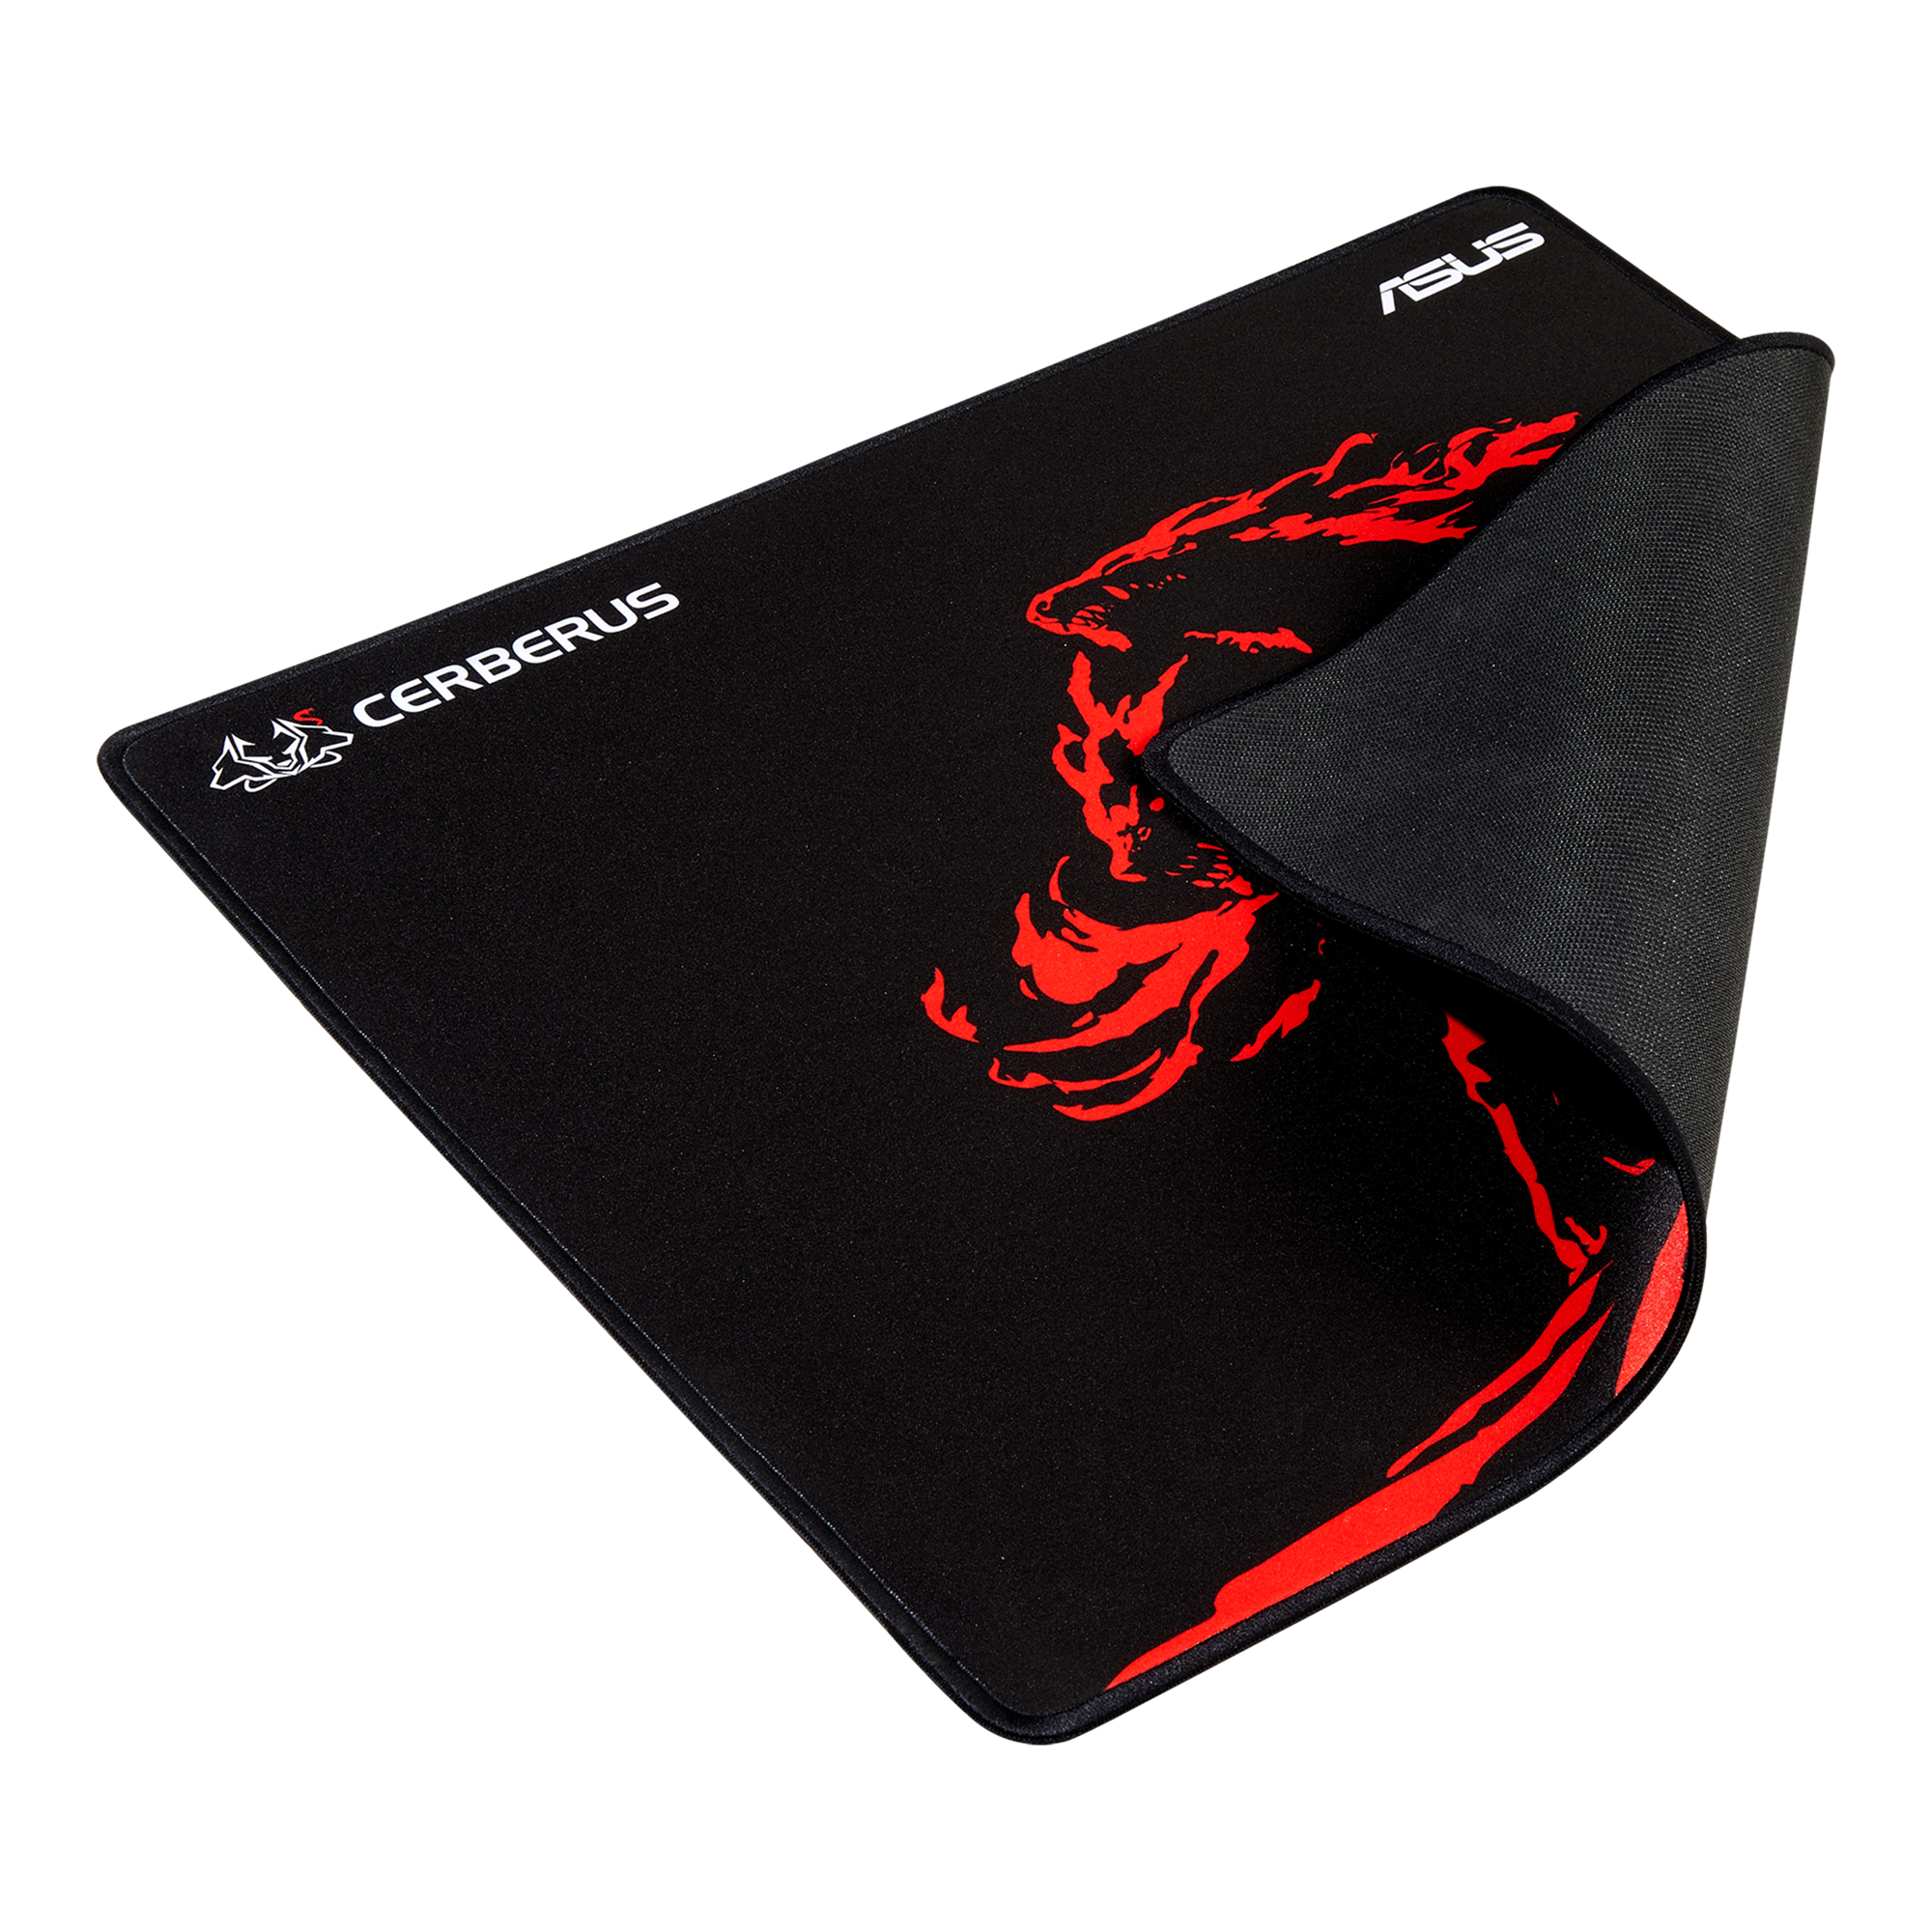 Cerberus Mat Gaming Mouse Pad Series Mice And Mouse Pads Asus Singapore